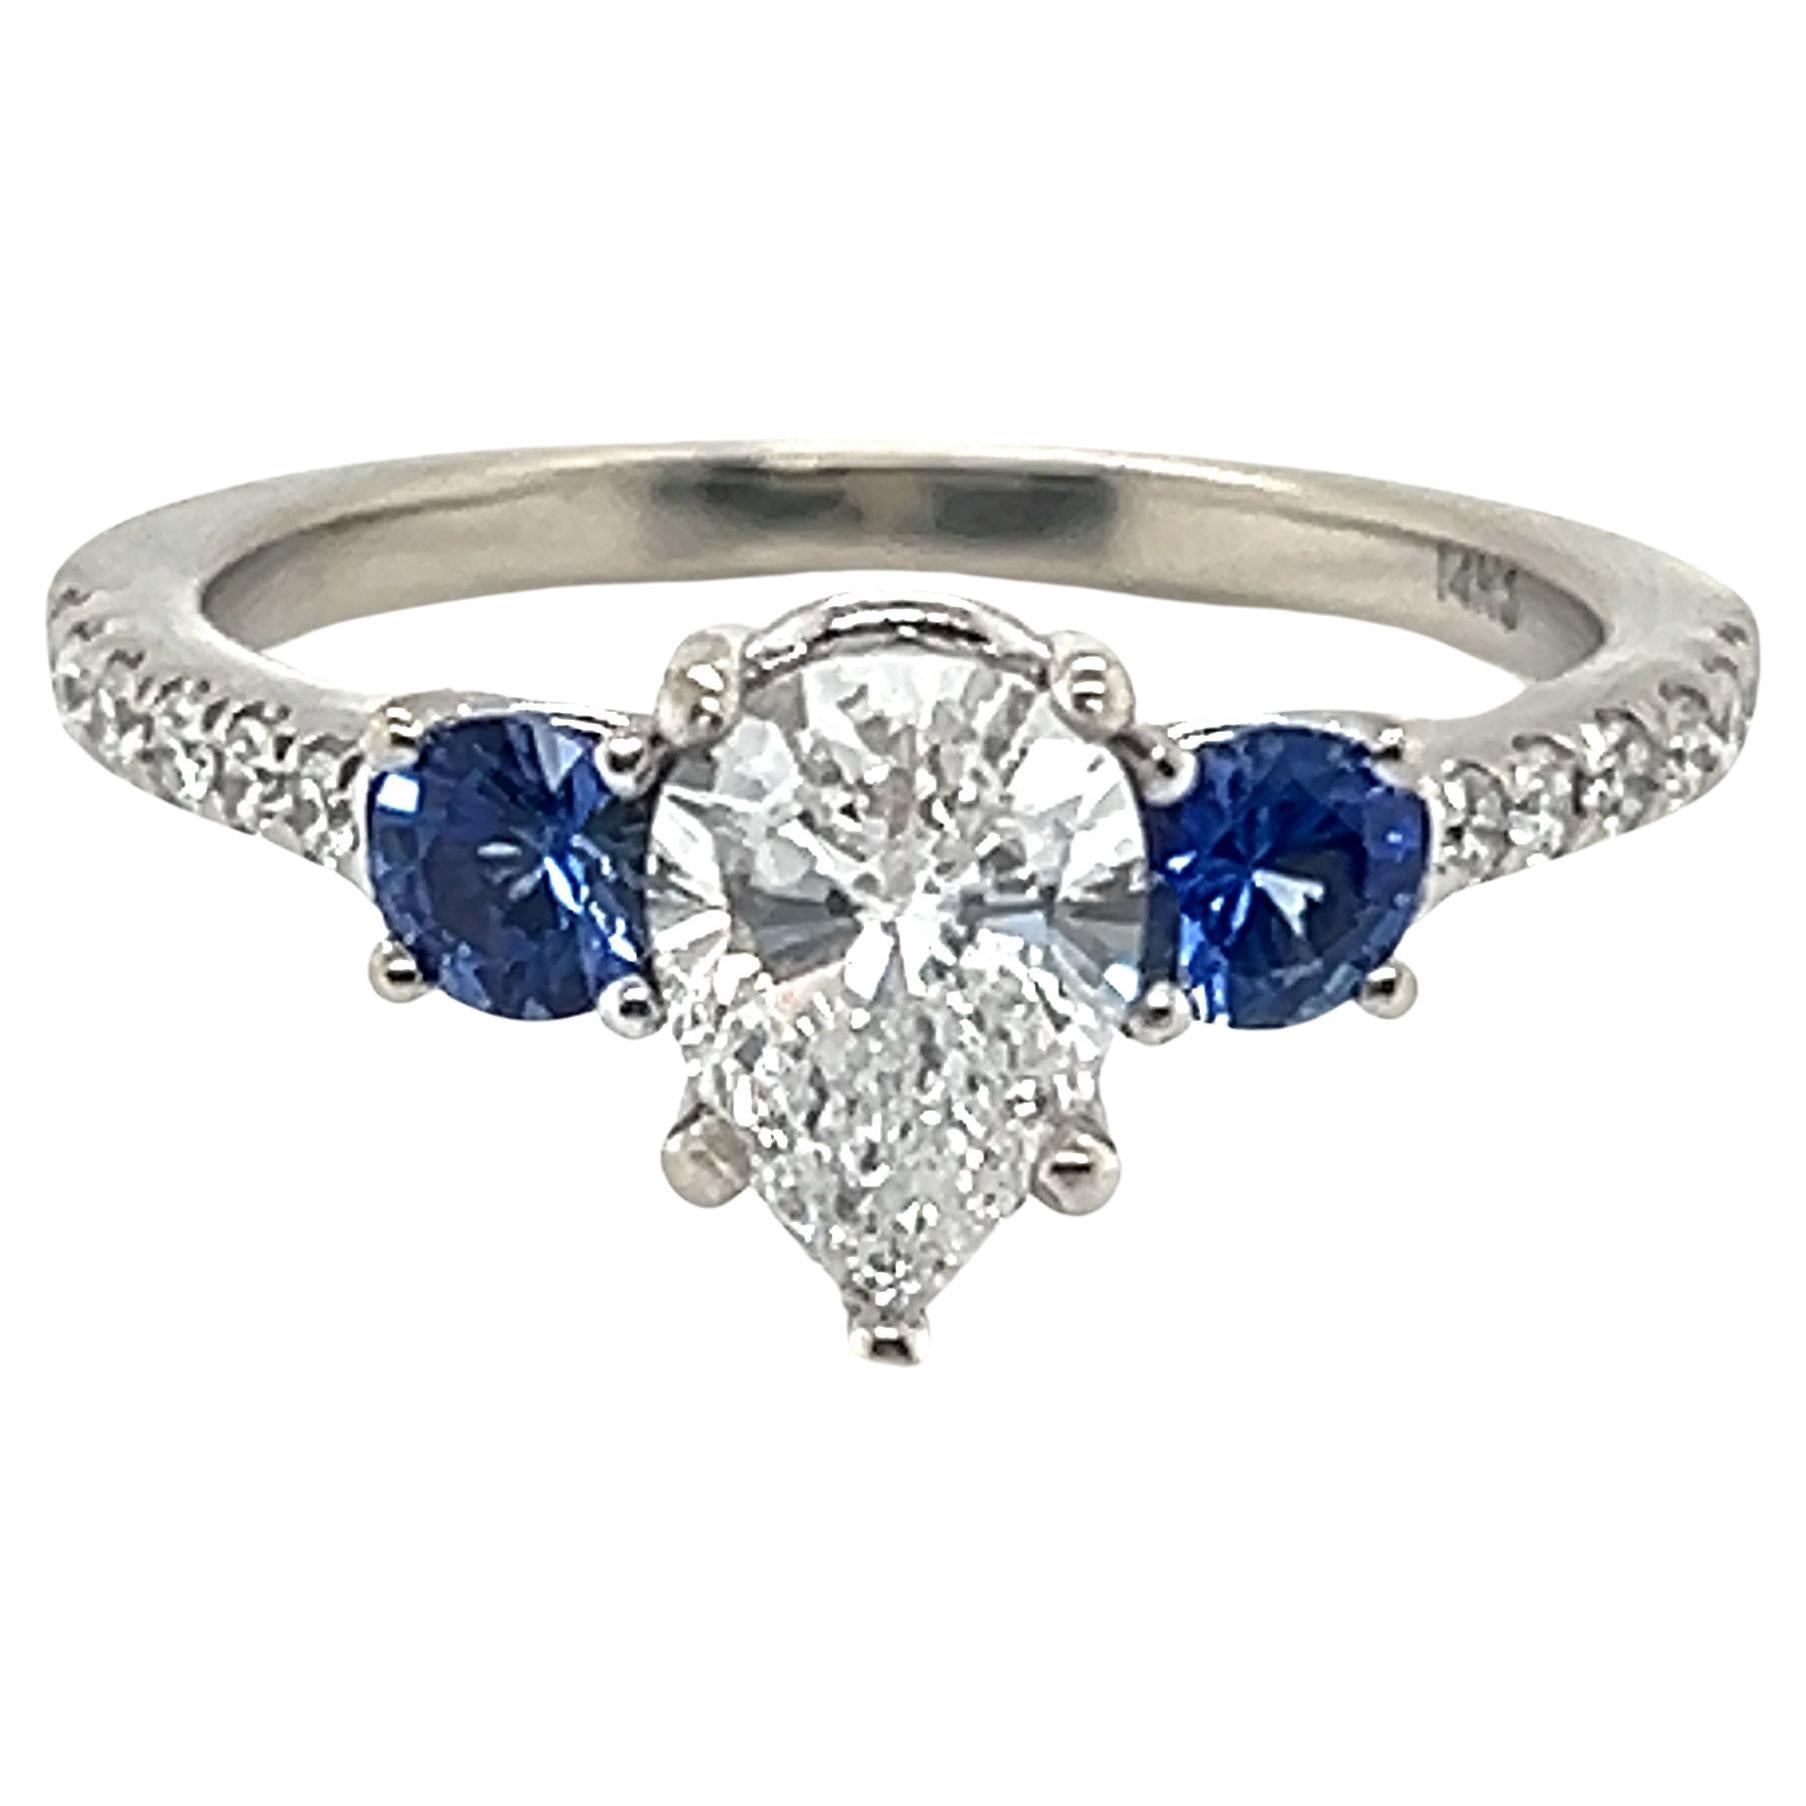 Diamond Sapphire Engagement Ring Mined Pear Cut 1.50 Carat 14K White Gold 1.50ct